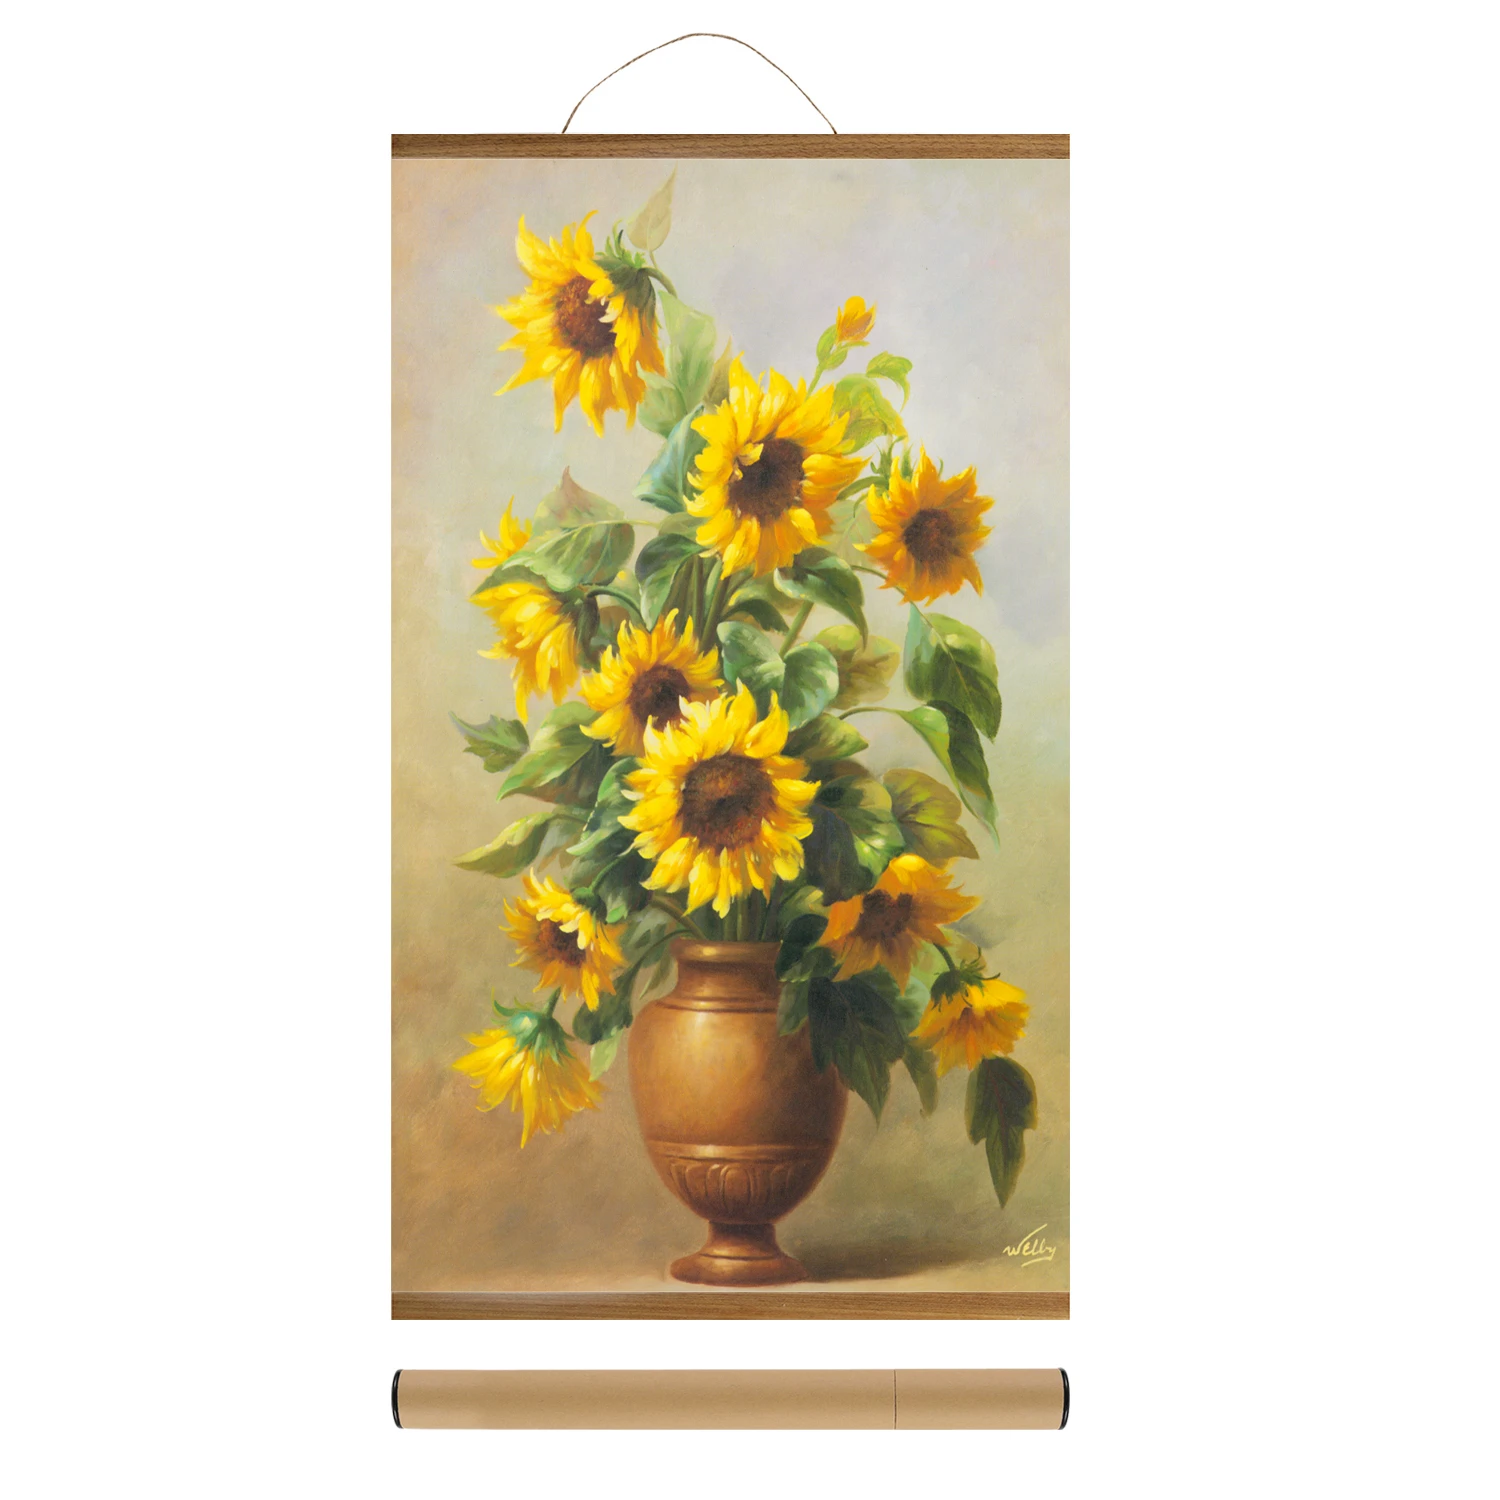 Download Sunflower For Home Decor Magnetic Oil Paintings Art Made In Usa Painting On Canvas For Living Room Magic Painting Buy Magnetic Oil Paintings Art In Usa Flowers For Home Decor Flower